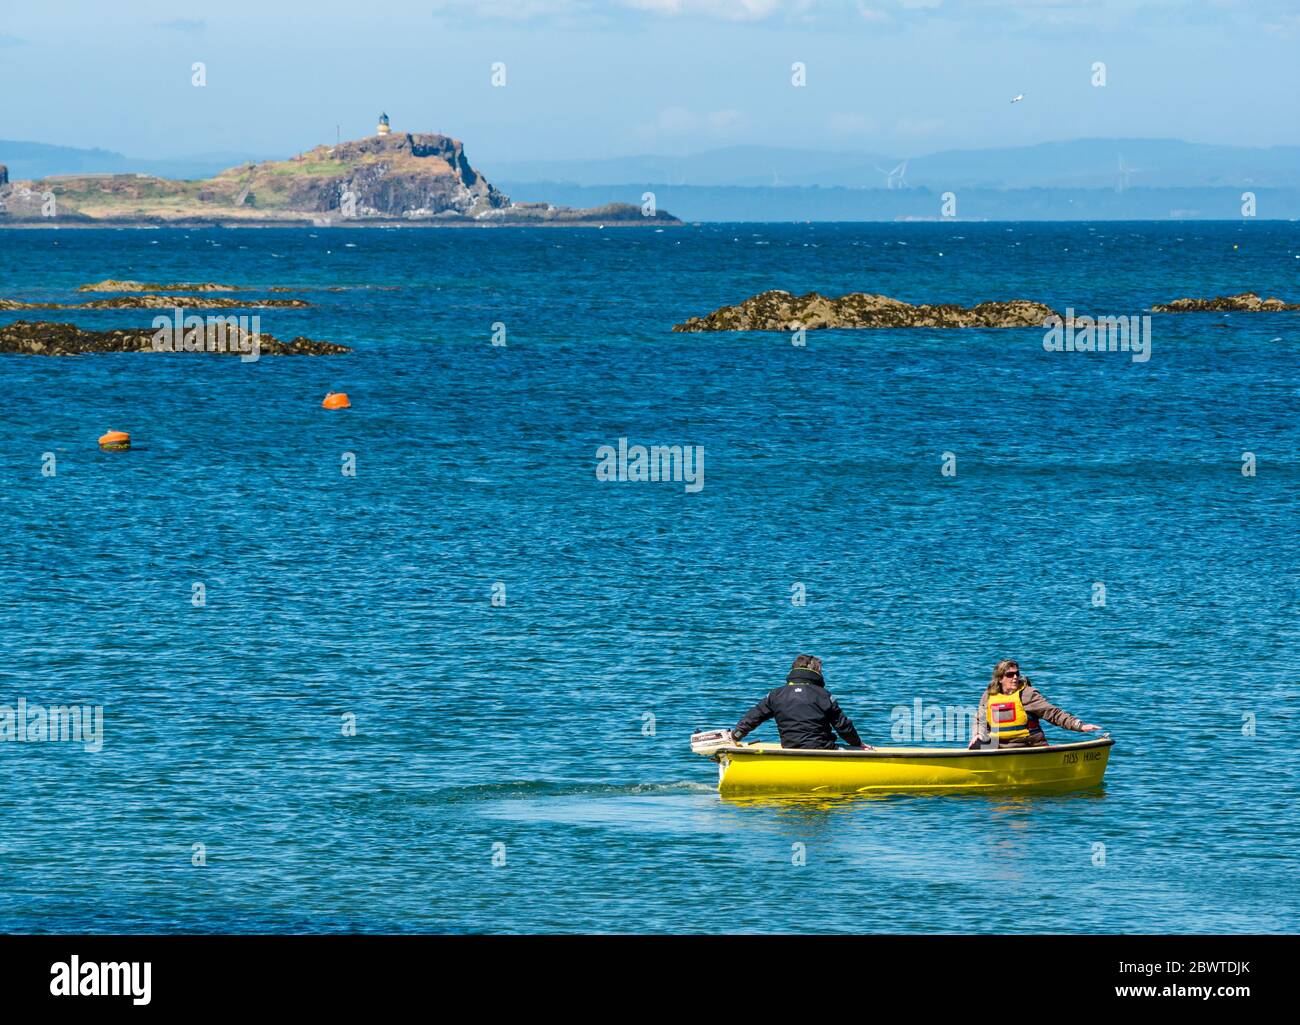 Couple in small boat with outboard engine and view of Fidra Island, North Berwick, East Lothian, Scotland, UK Stock Photo